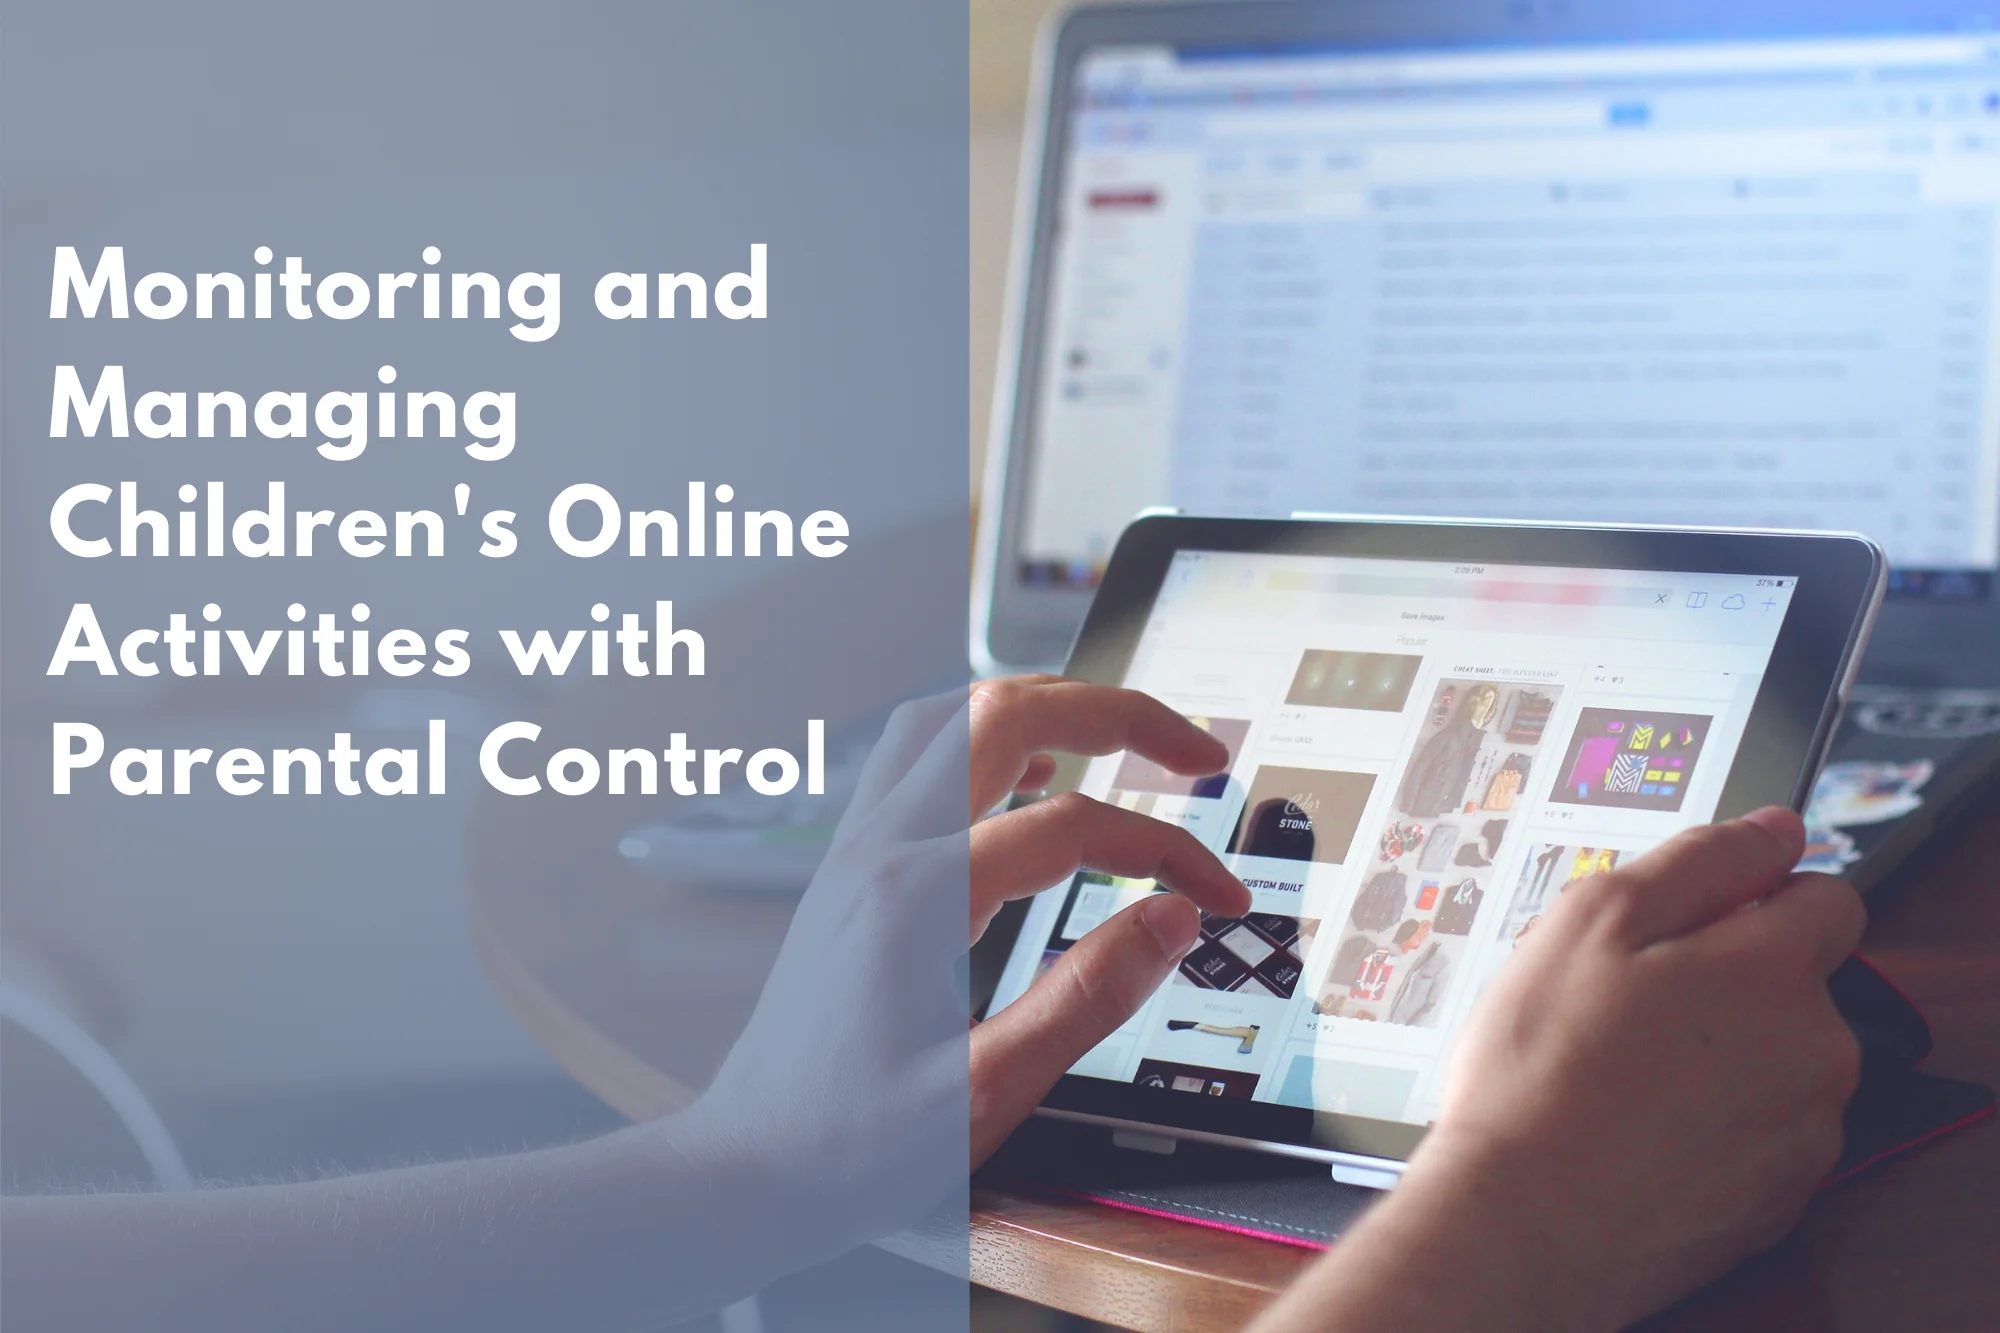 Monitoring and Managing Children's Online Activities with Parental Control